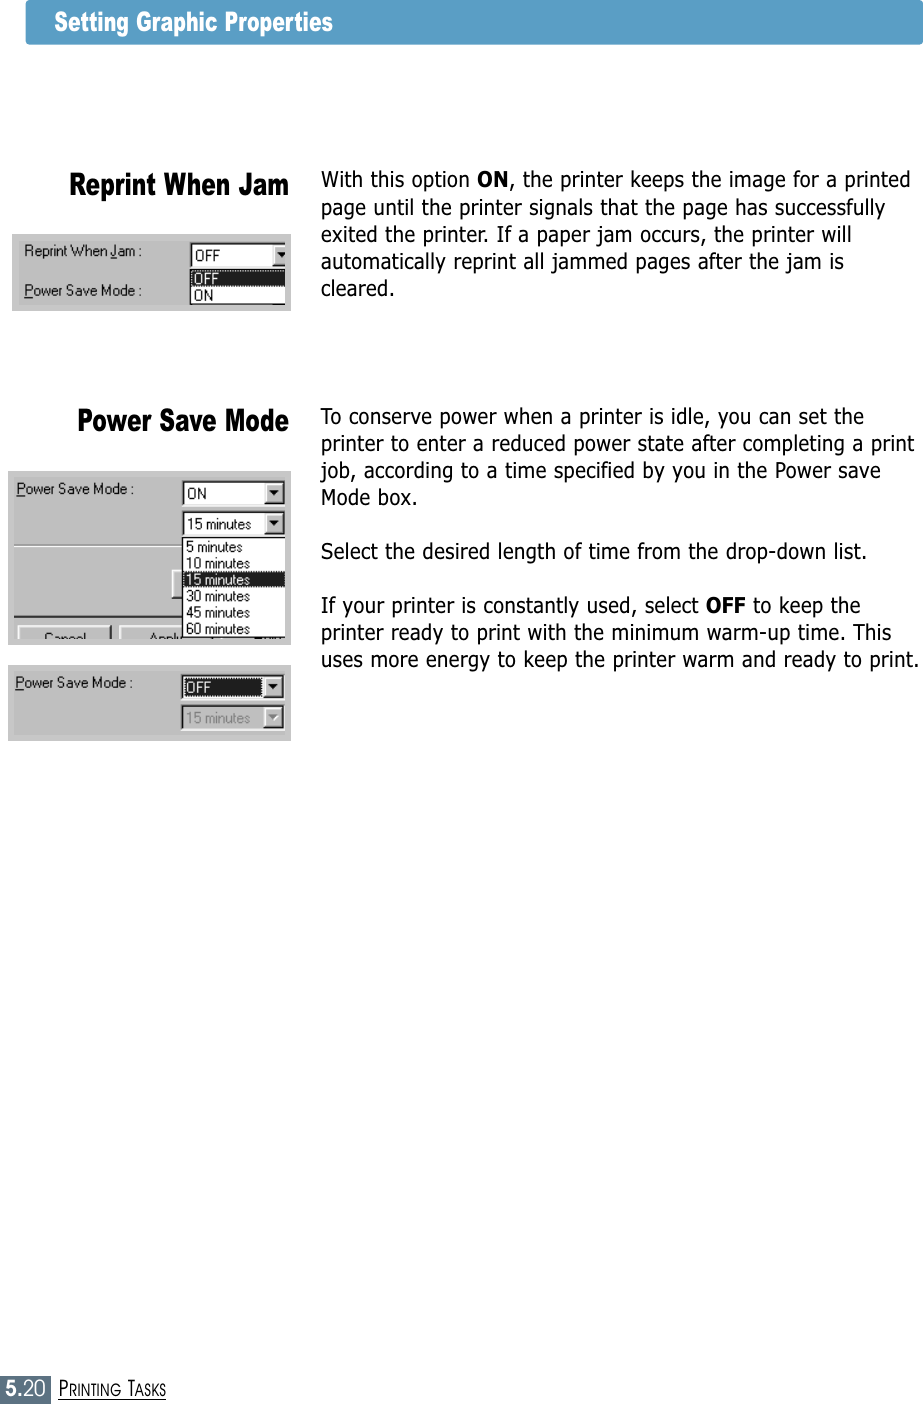 5.20PRINTING TASKSSetting Graphic PropertiesTo conserve power when a printer is idle, you can set theprinter to enter a reduced power state after completing a printjob, according to a time specified by you in the Power saveMode box.Select the desired length of time from the drop-down list.If your printer is constantly used, select OFF to keep theprinter ready to print with the minimum warm-up time. Thisuses more energy to keep the printer warm and ready to print.Power Save ModeWith this option ON, the printer keeps the image for a printedpage until the printer signals that the page has successfullyexited the printer. If a paper jam occurs, the printer willautomatically reprint all jammed pages after the jam iscleared.Reprint When Jam